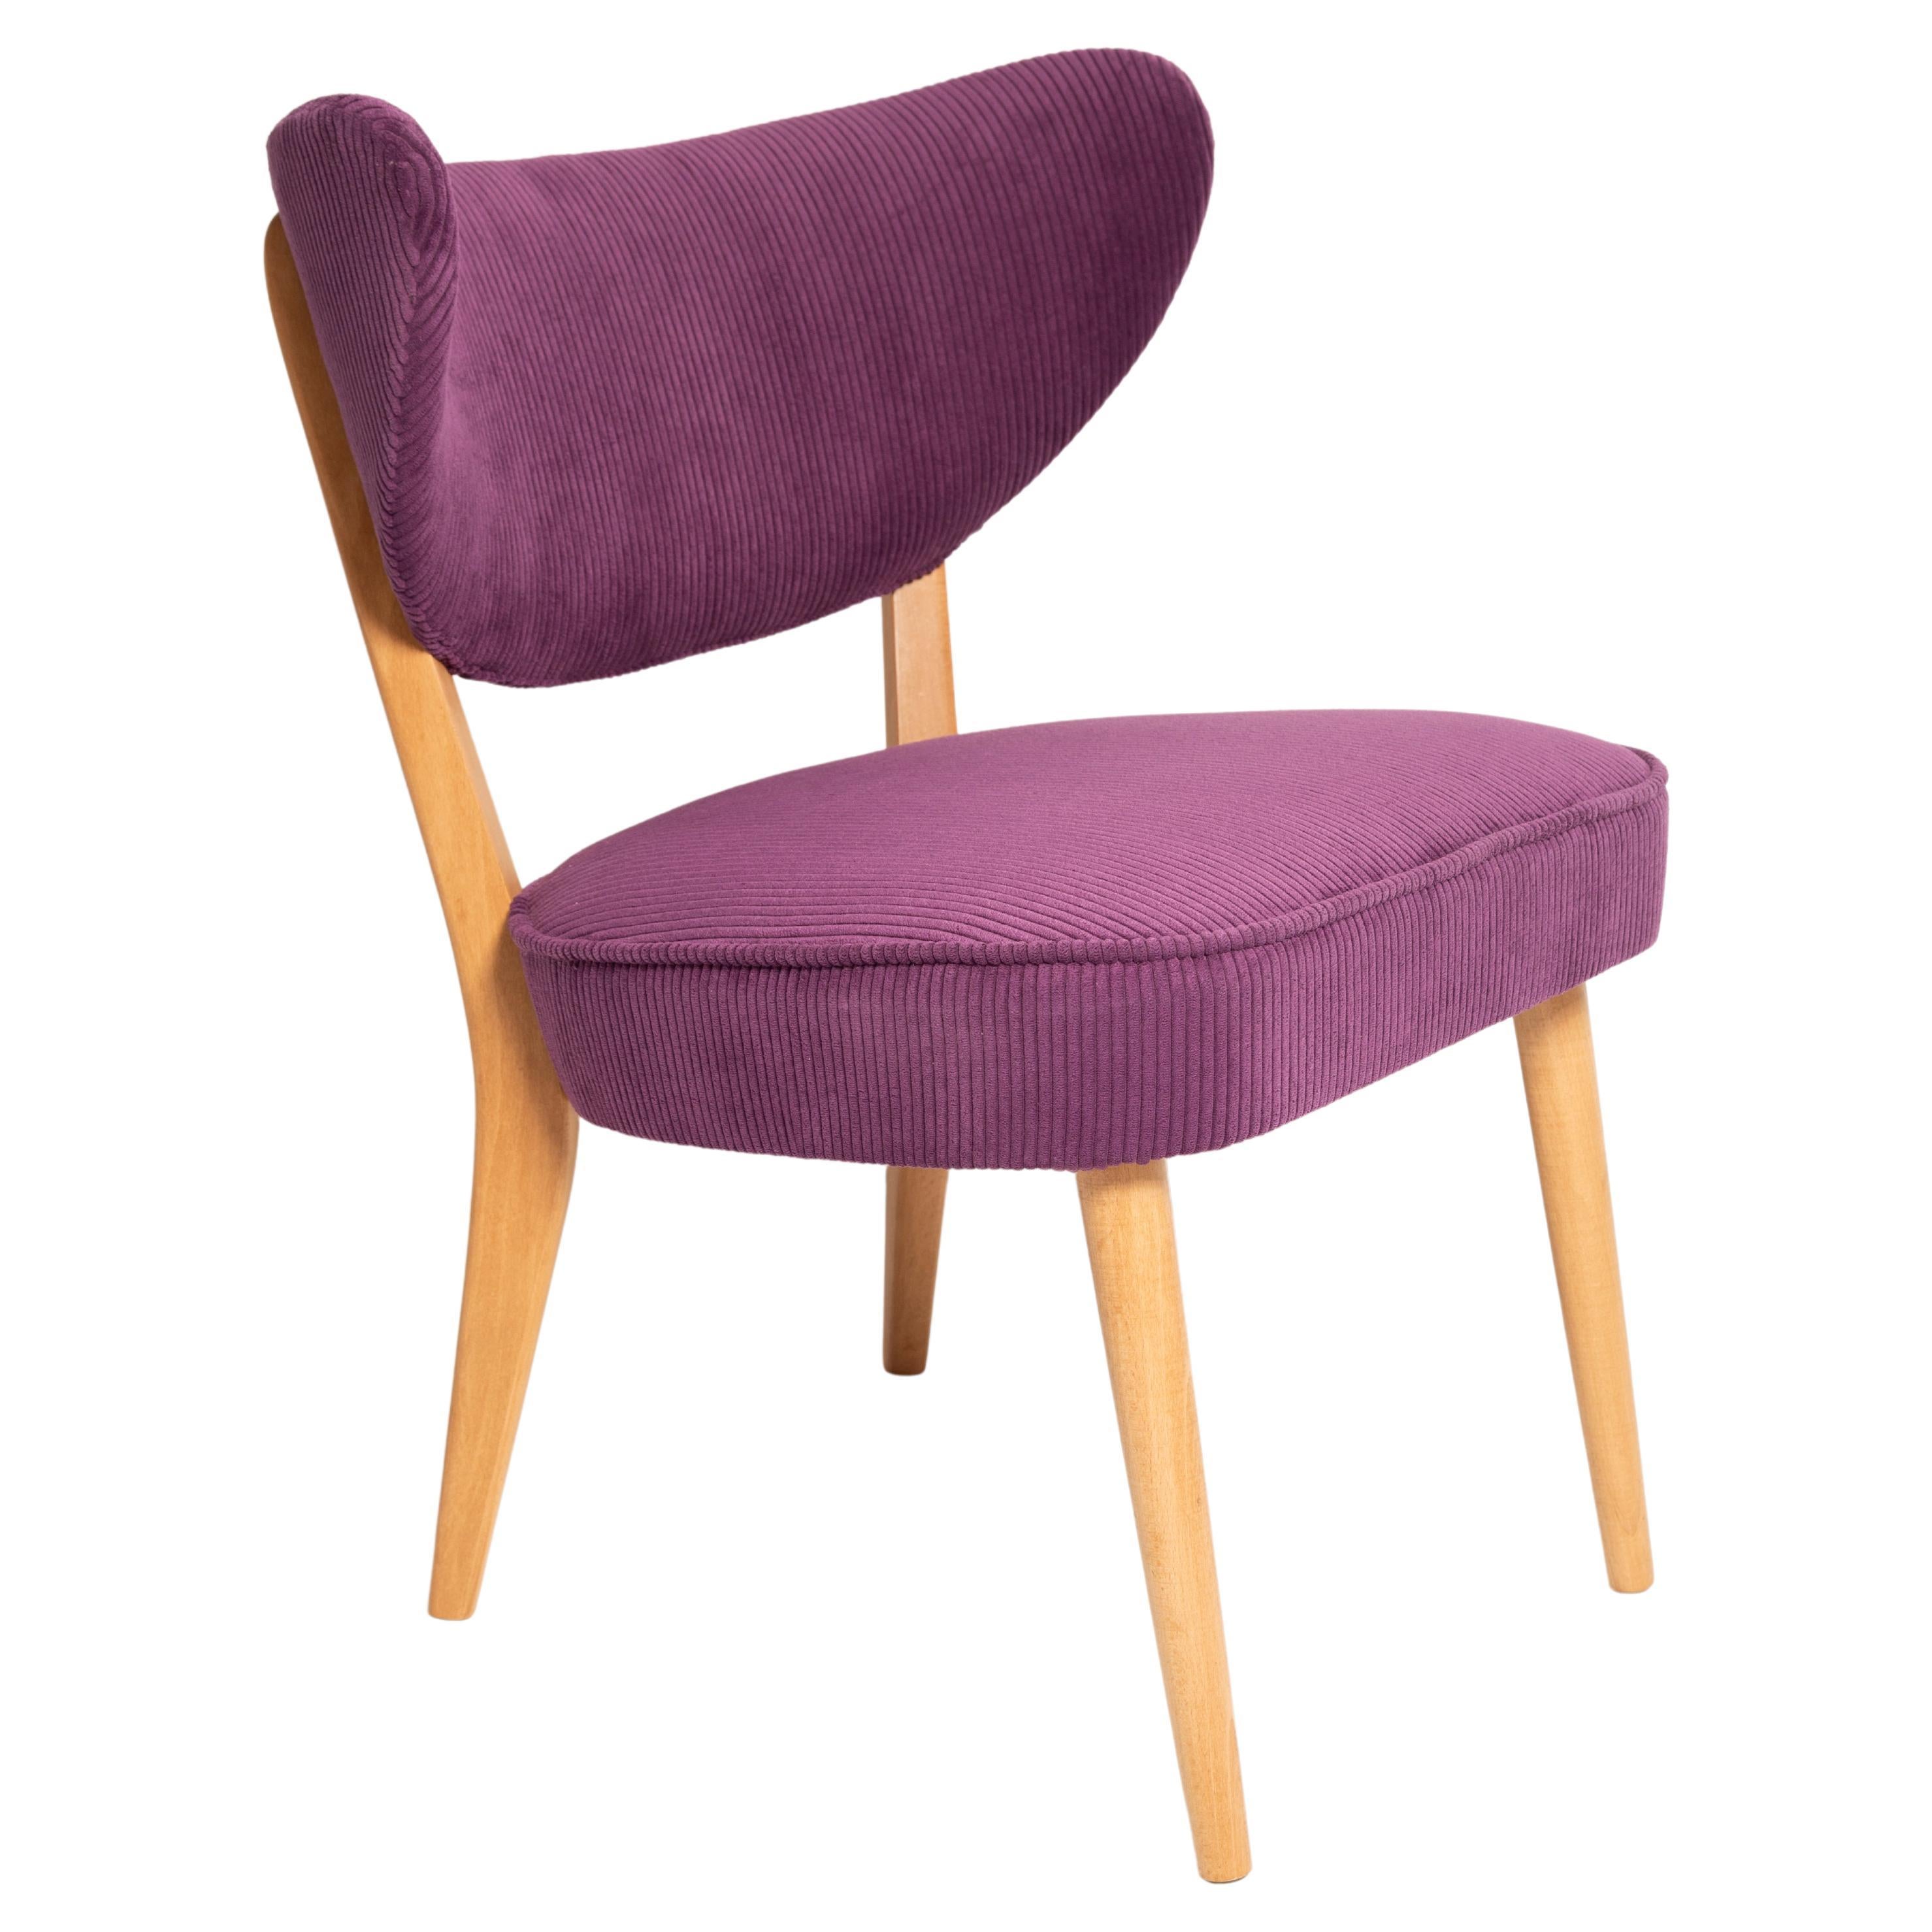 Midcentury Style Violet Velvet Club Chair, by Vintola Studio, Europe, Poland For Sale